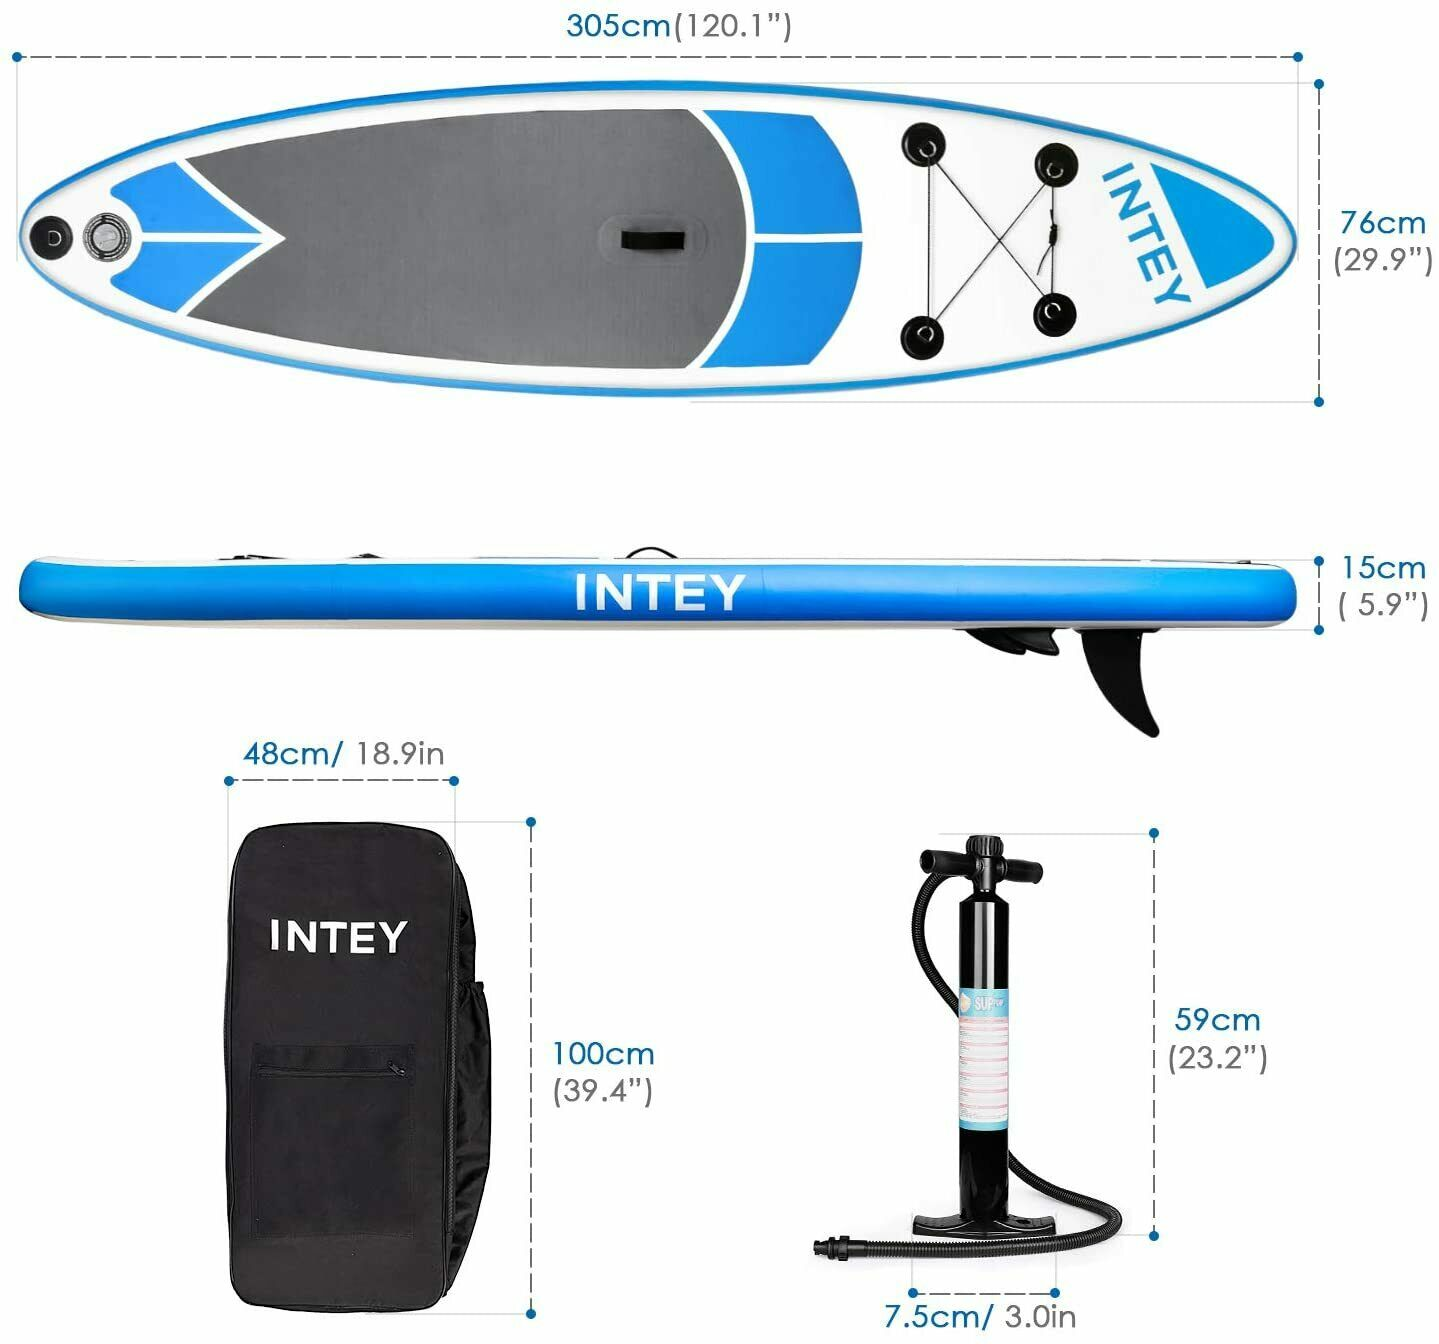 Intey Inflatable Specs and Measurements.